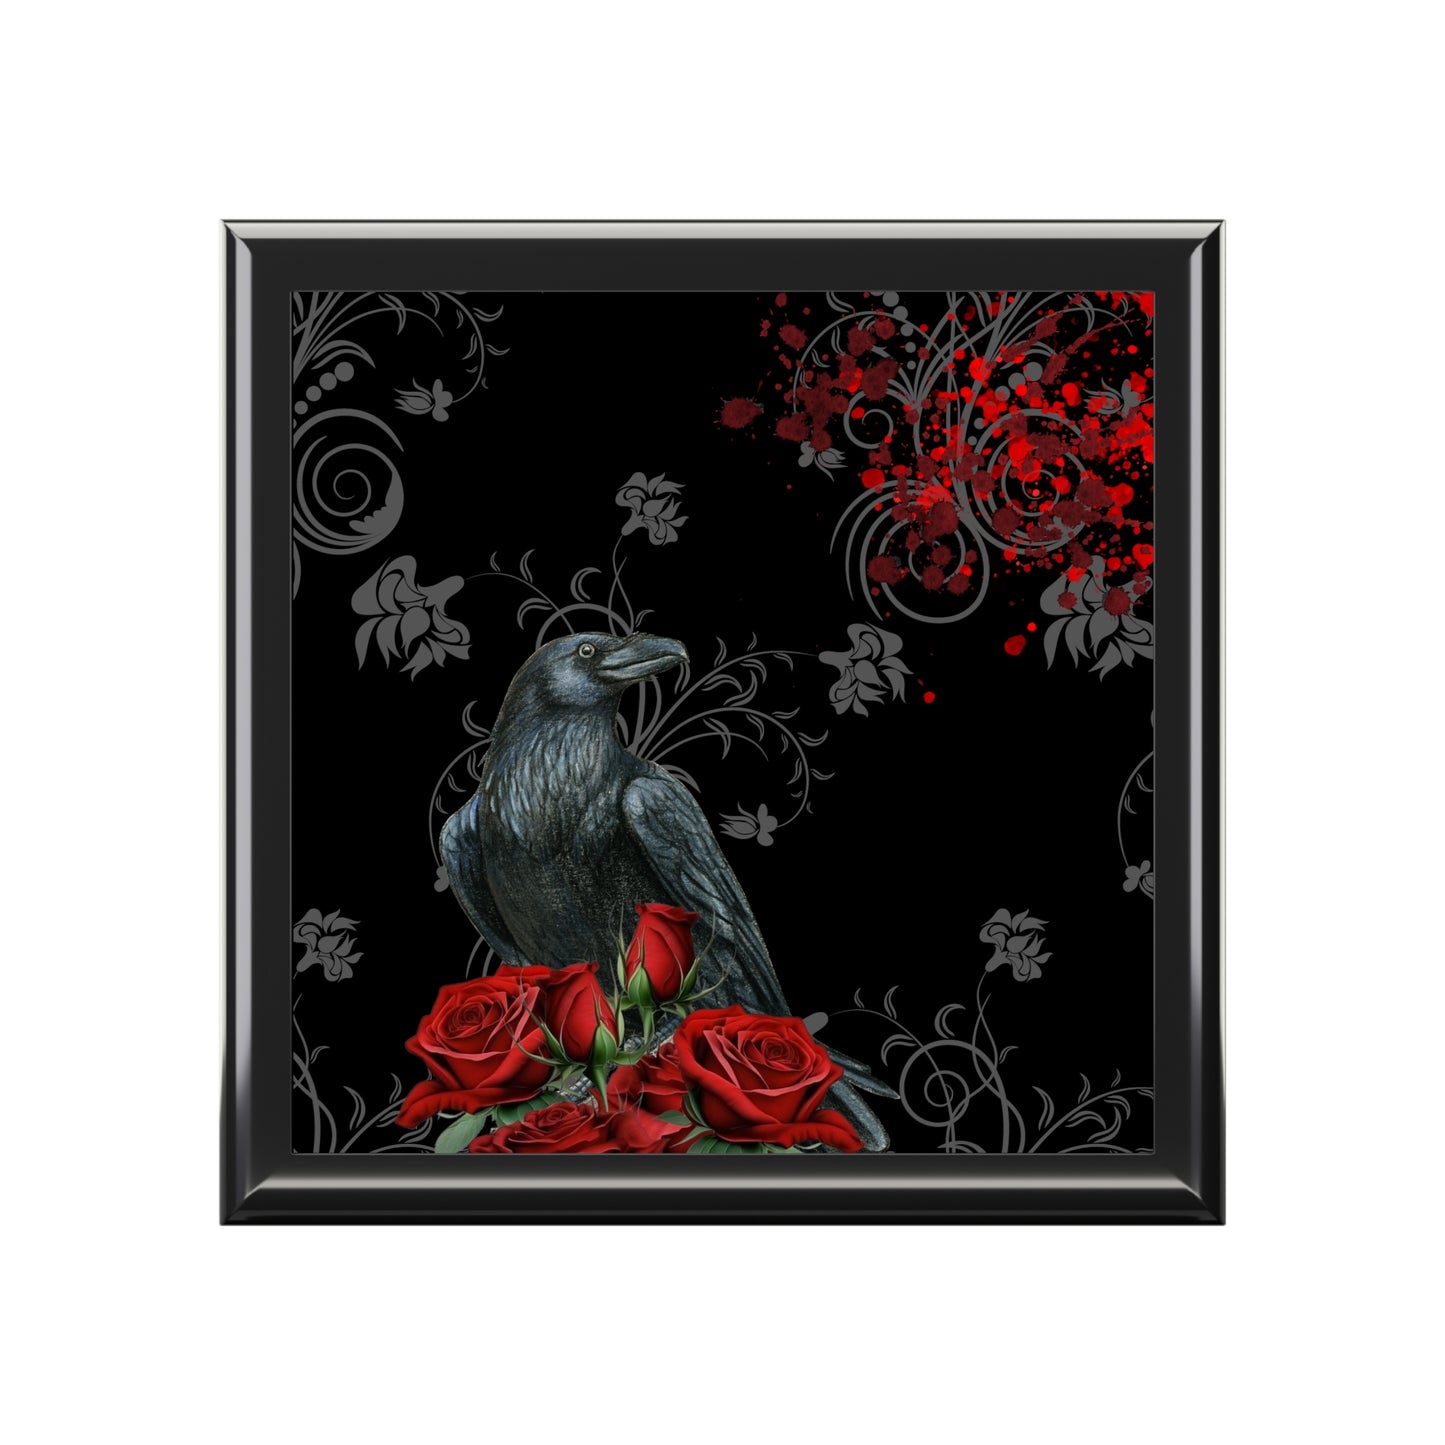 Black Feathers & Red Roses Jewelry Box